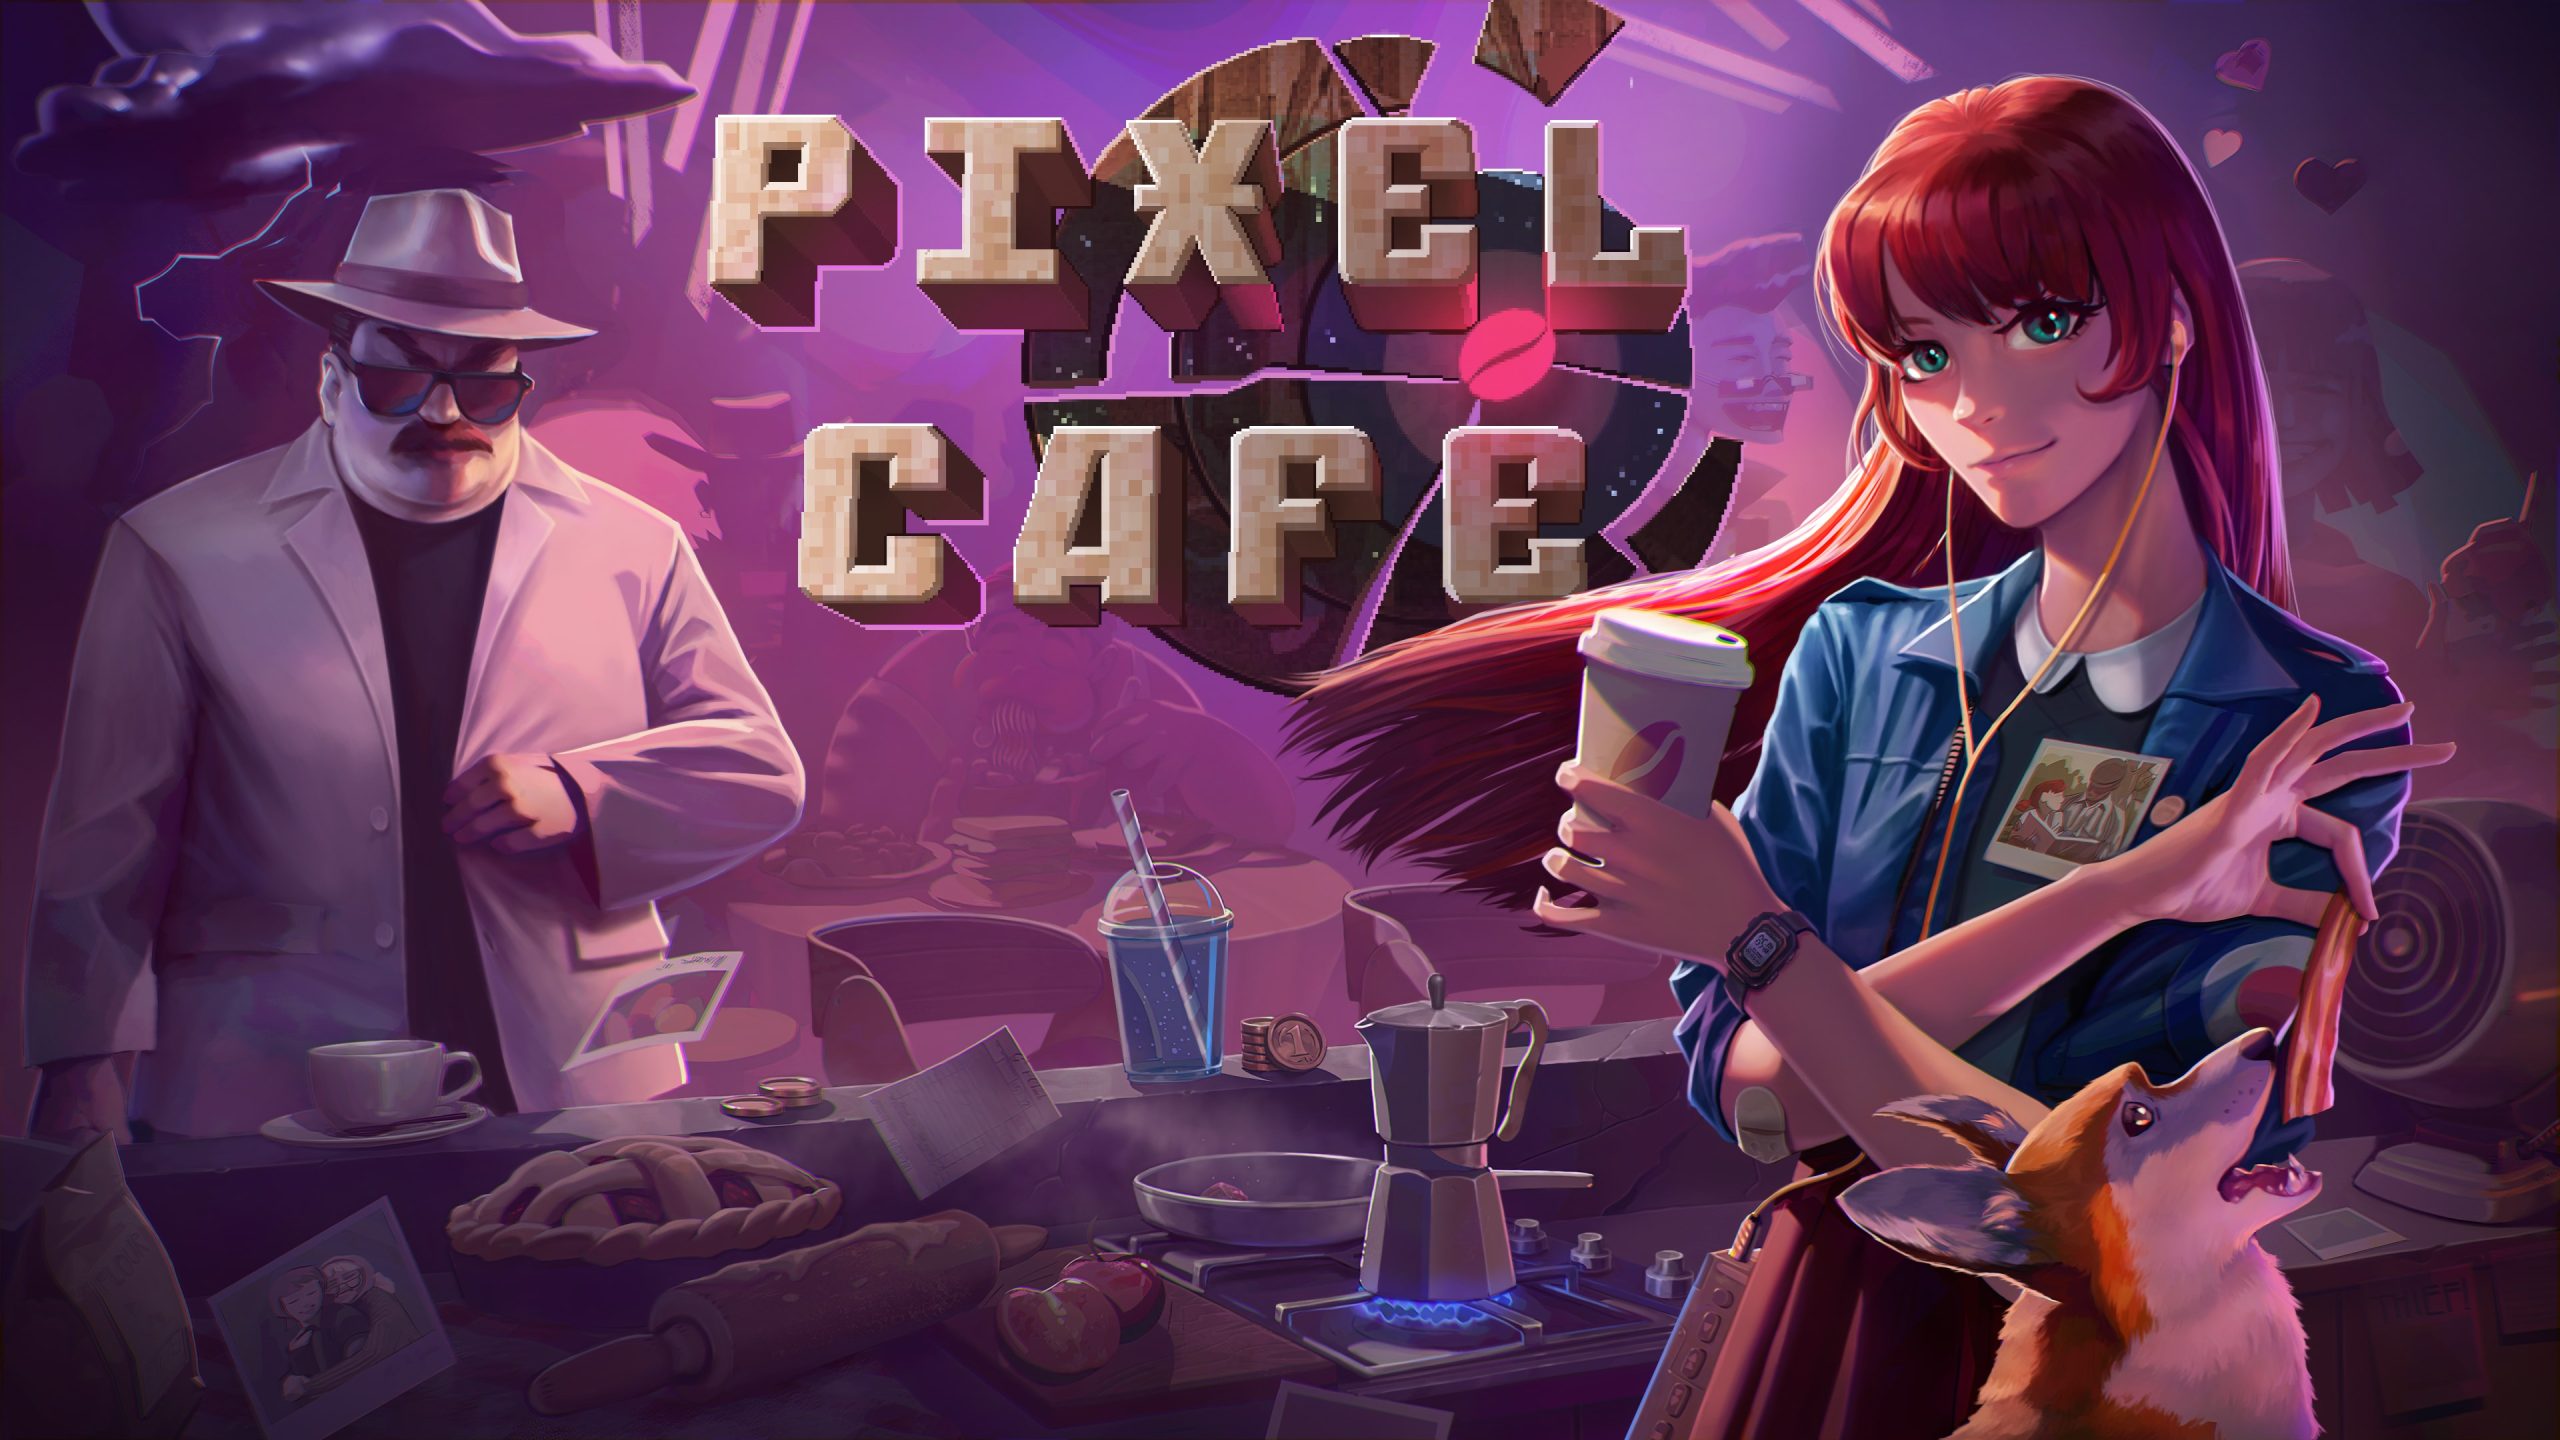 The key art for Pixel Cafe. Pixel is a woman with long red hair; she stands to the right holding a cup of coffee and a slice of bacon that a dog is trying to grab. A restaurant counter is behind her. To the left is a large man with a beige suit and hat.